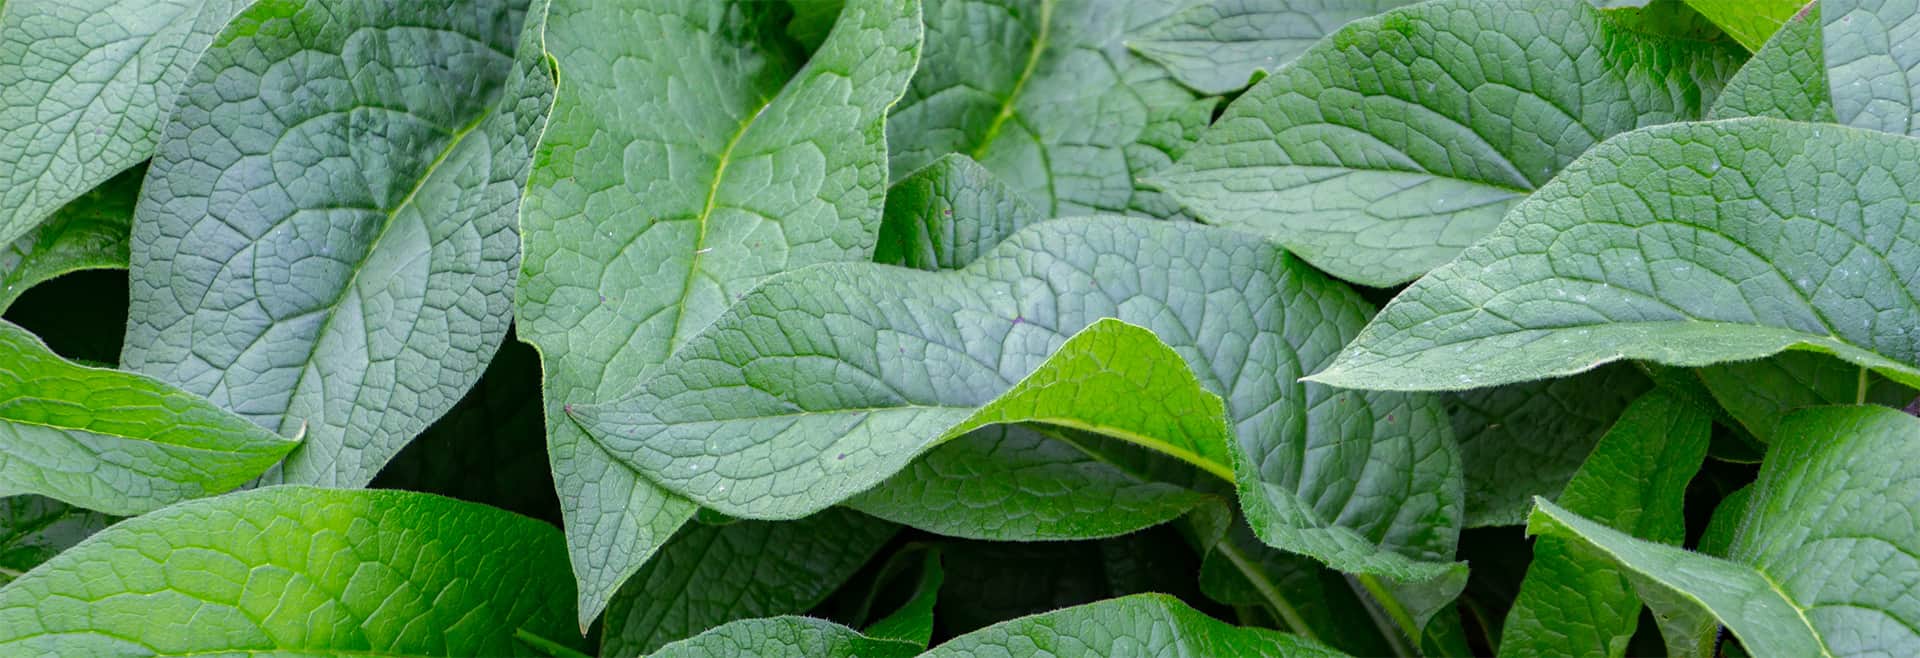 lush green leaves of common comfrey for natural gren background, also called symphytum officinale or beinwell